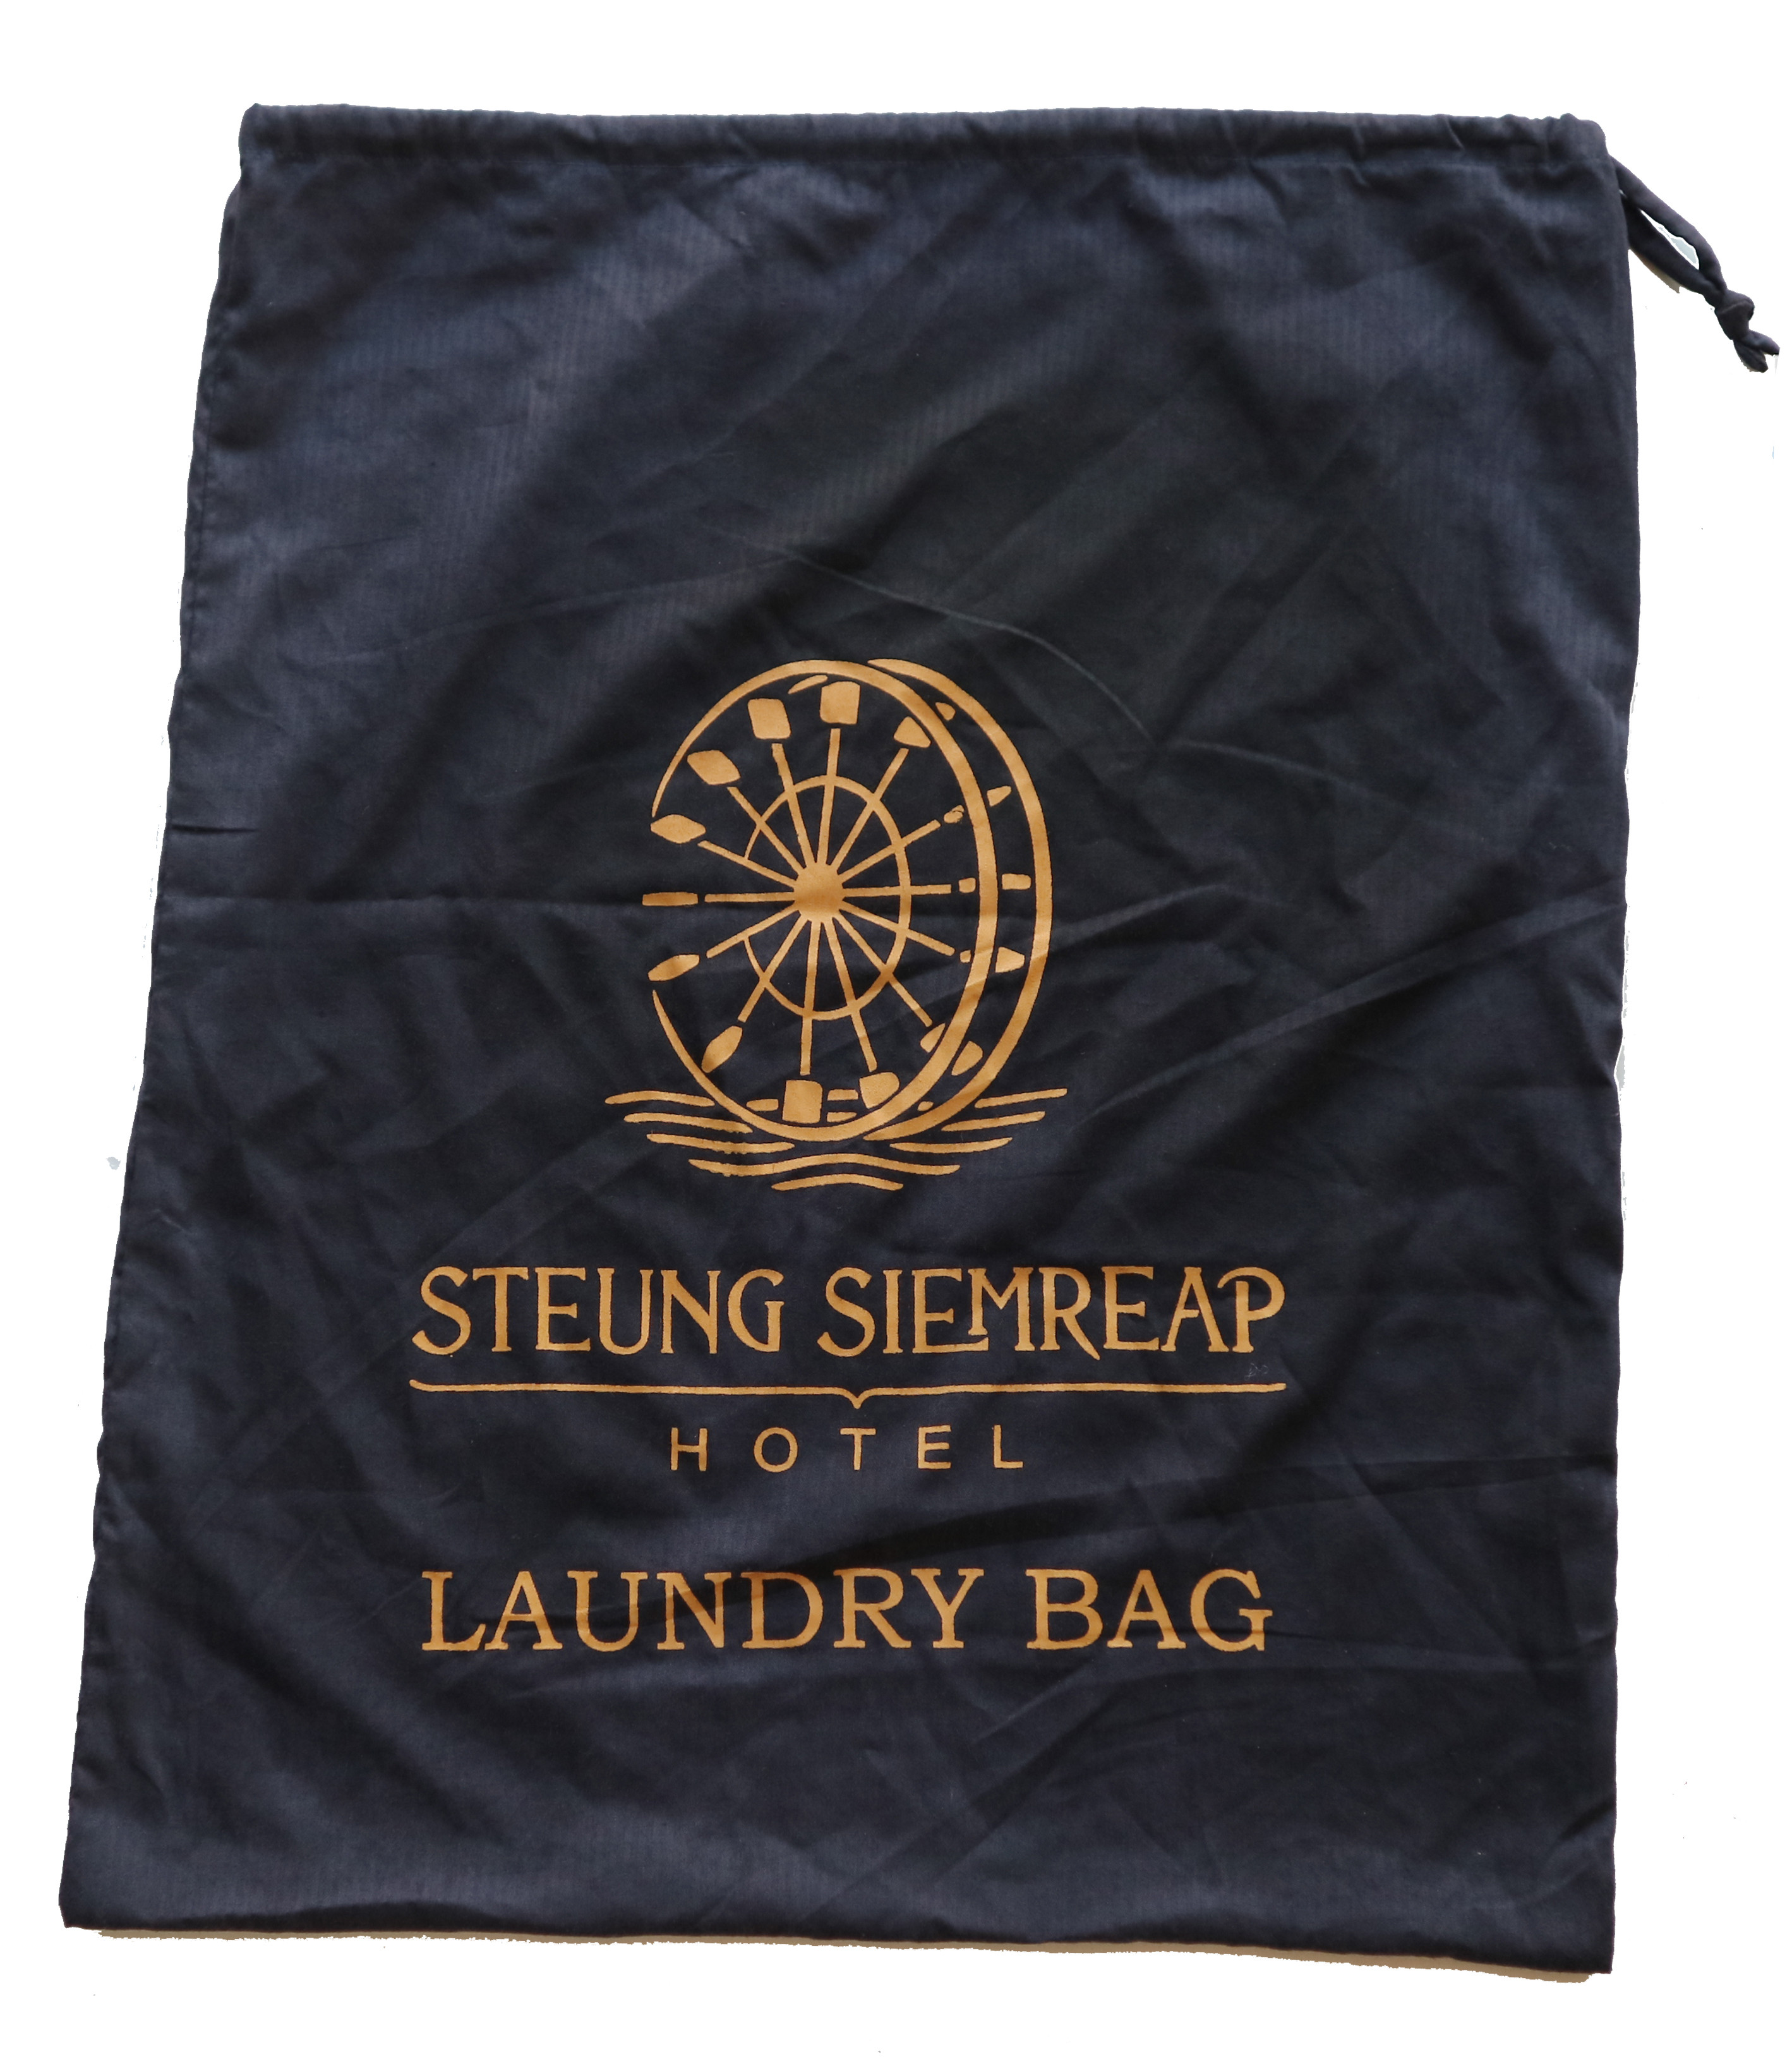 Re-usable Laundry Bags